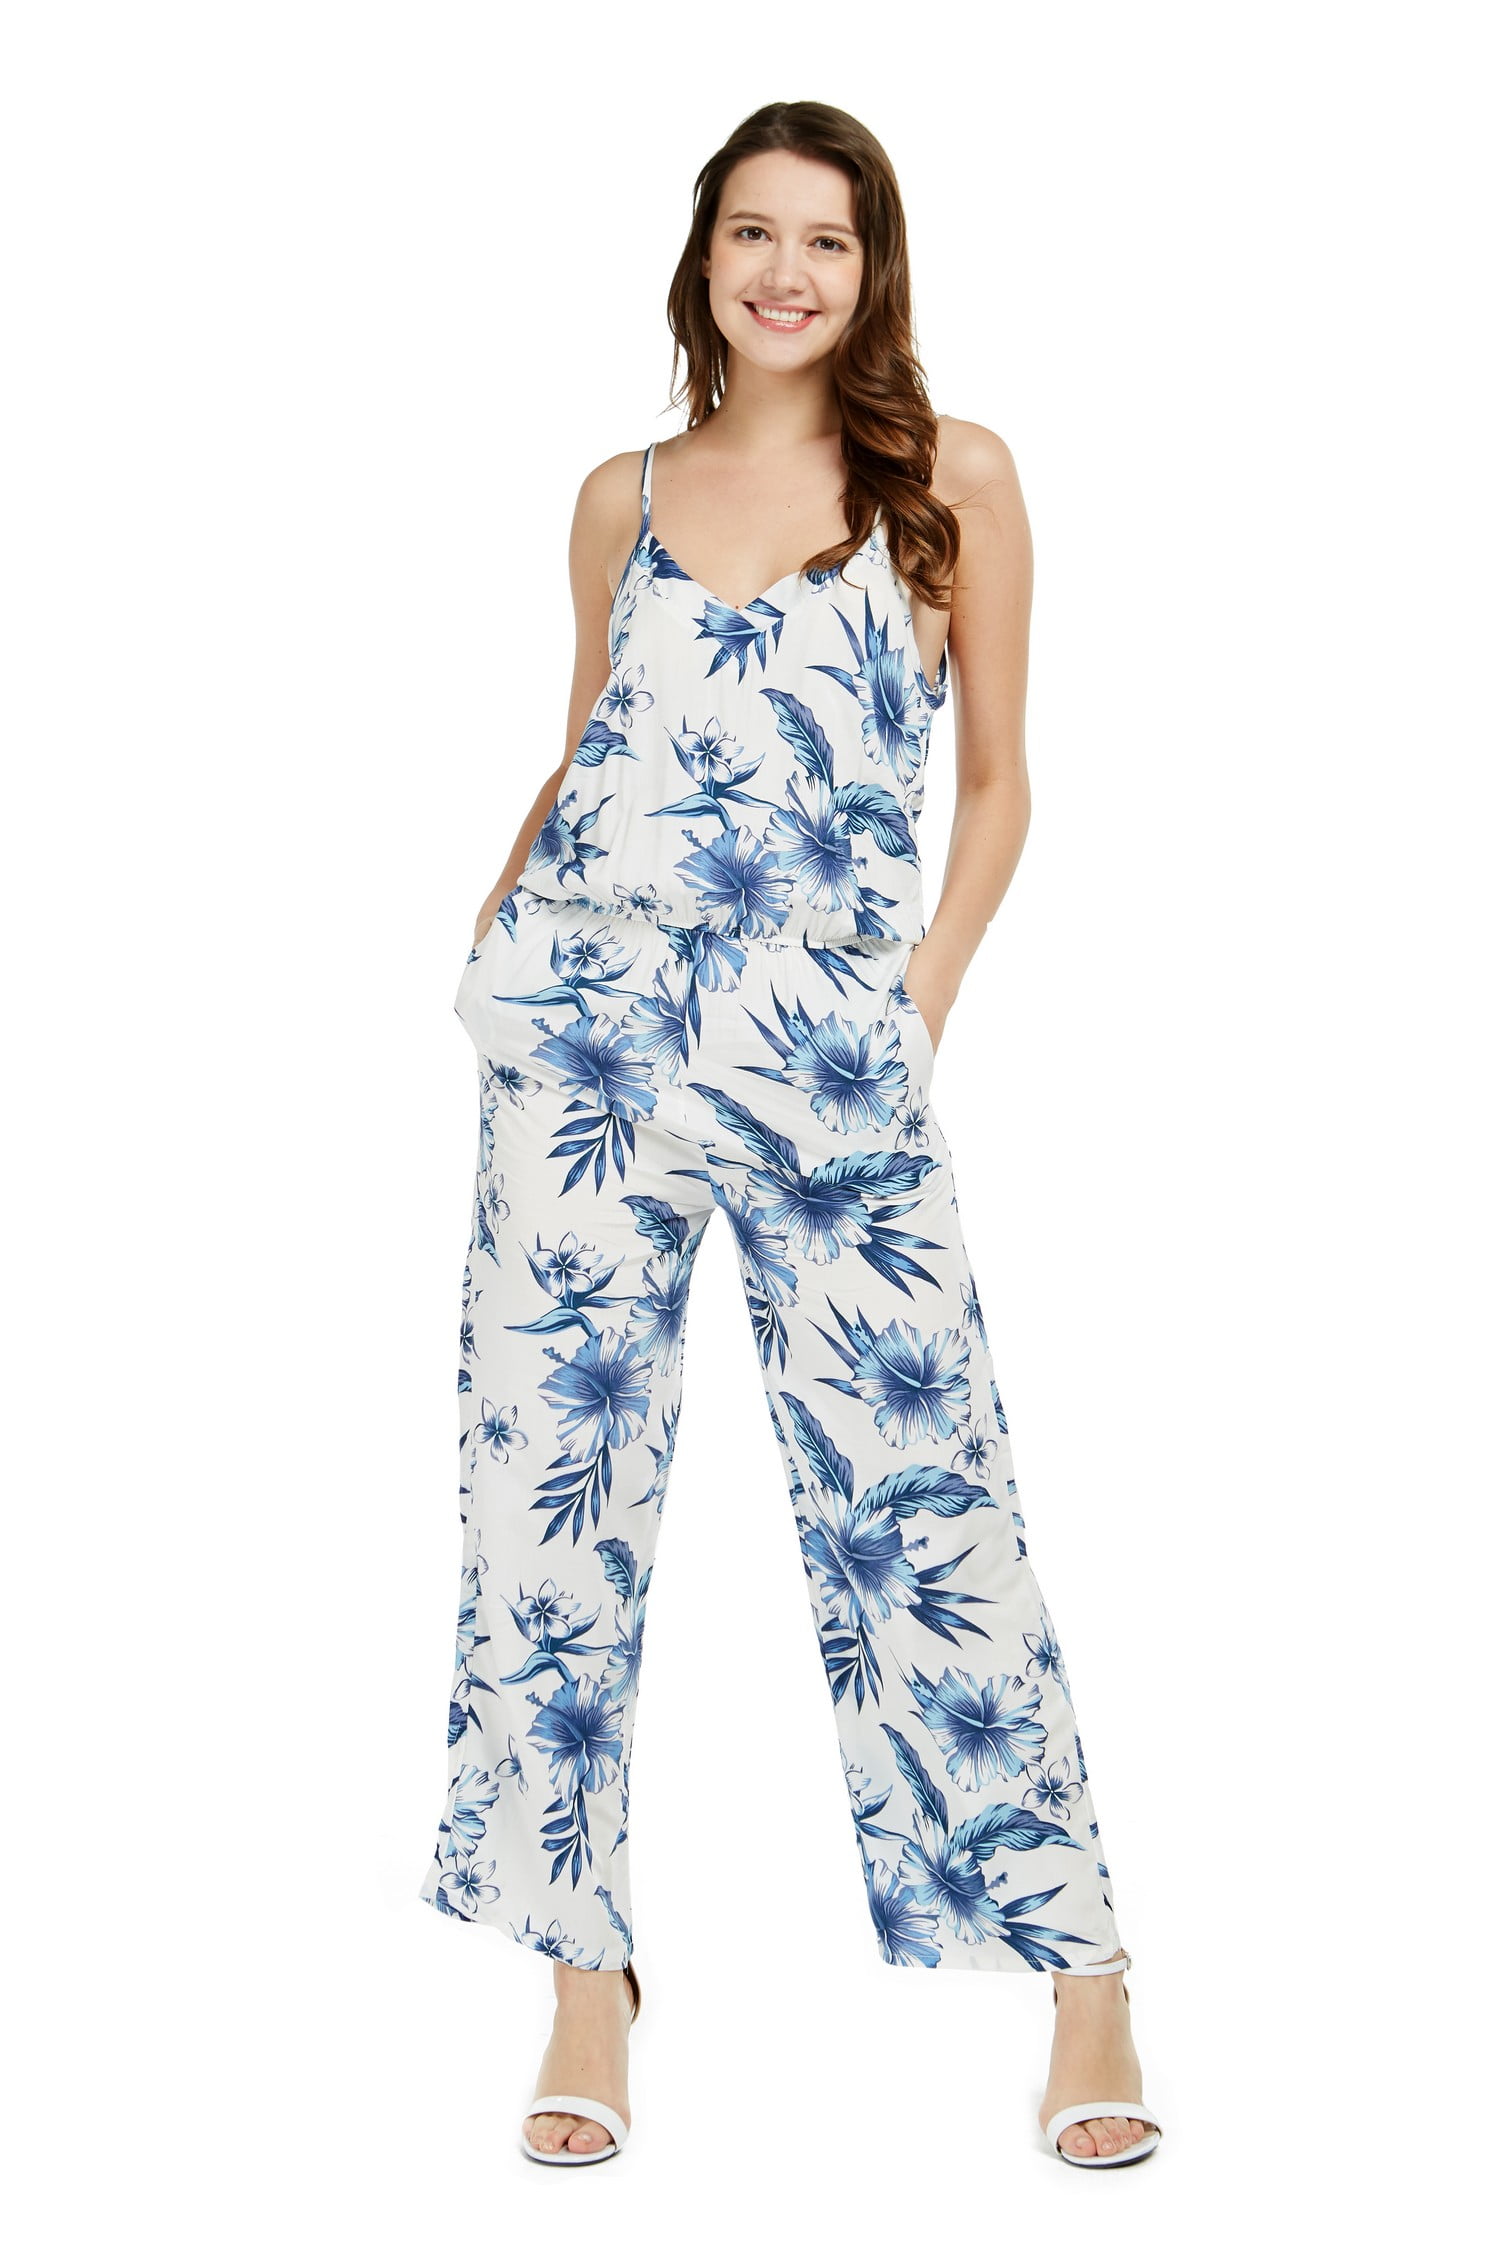 Hawaii Hangover - Women's Hawaiian Strap V with Pockets Jumpsuit in Day ...